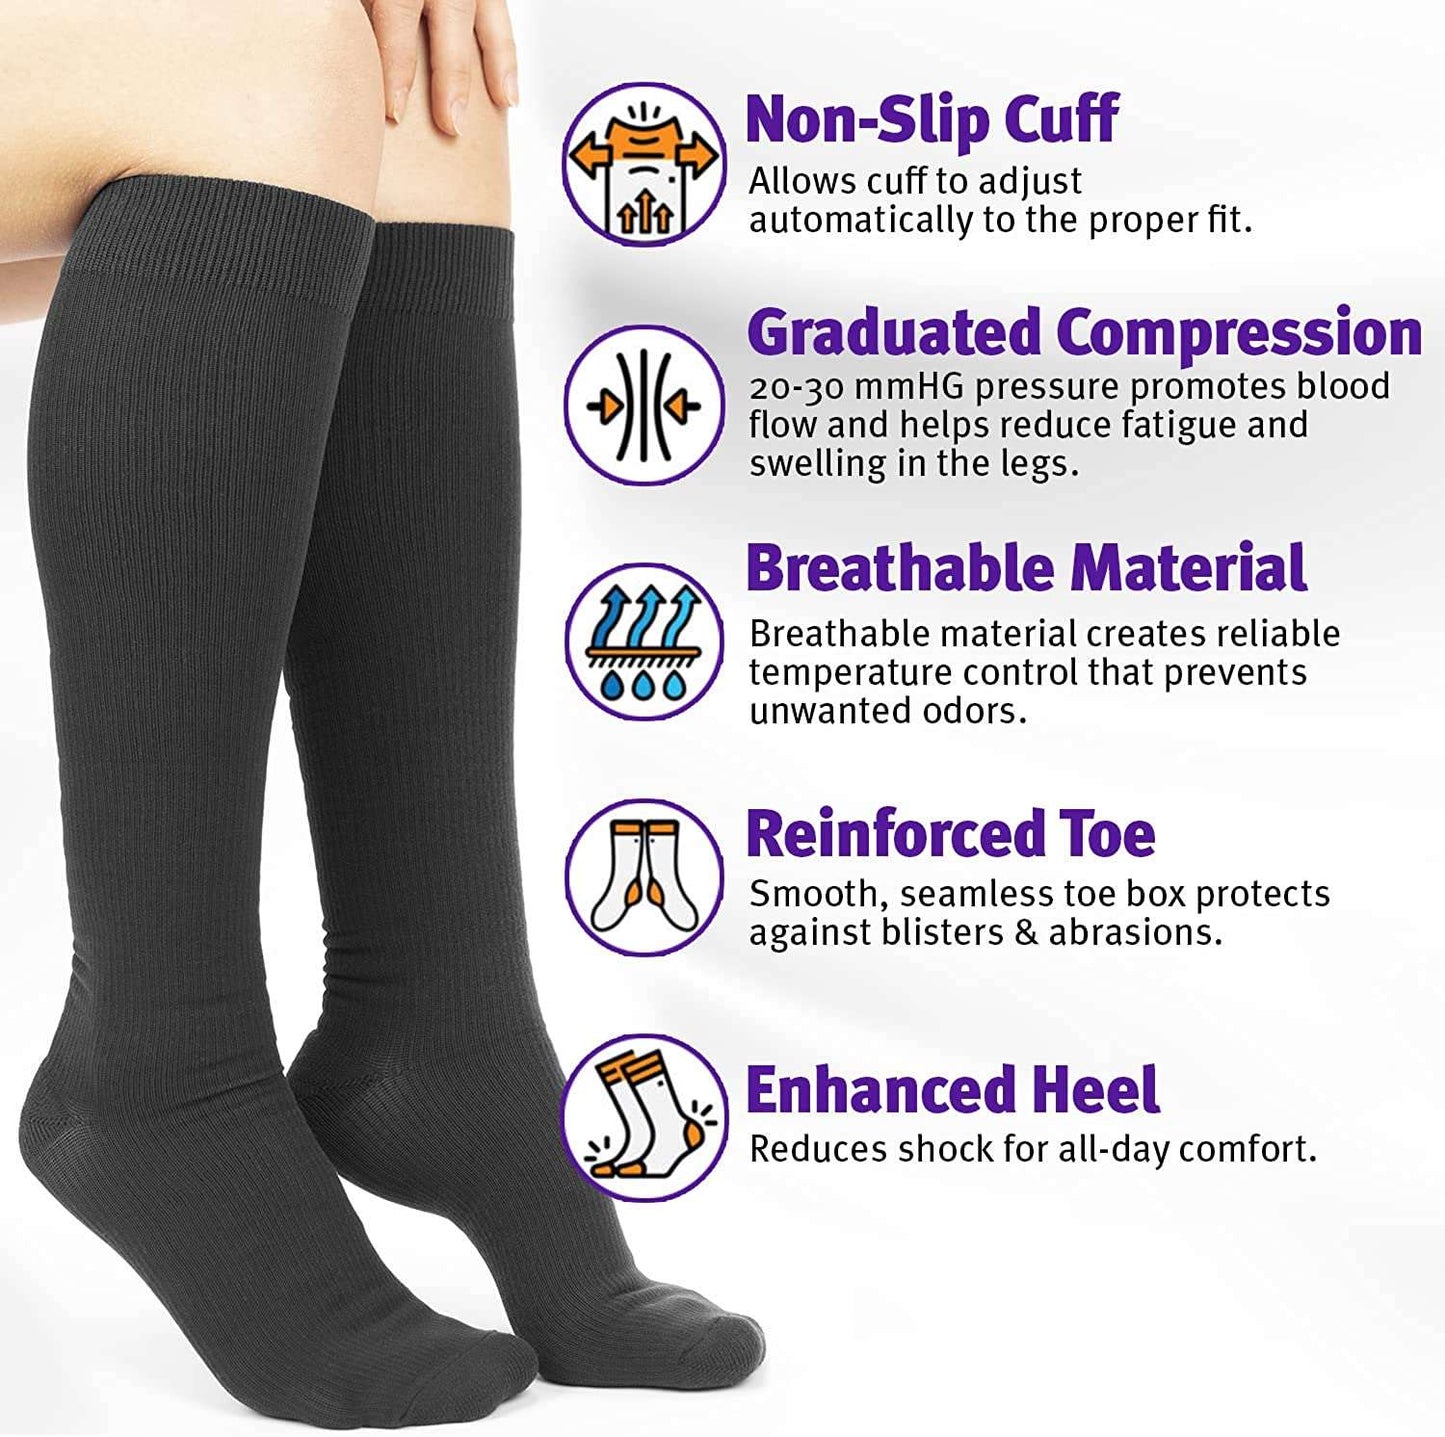 MDR Compression Socks Medical Knee High for Men & Women 20-30 mmHg 1 Pair Made in USA